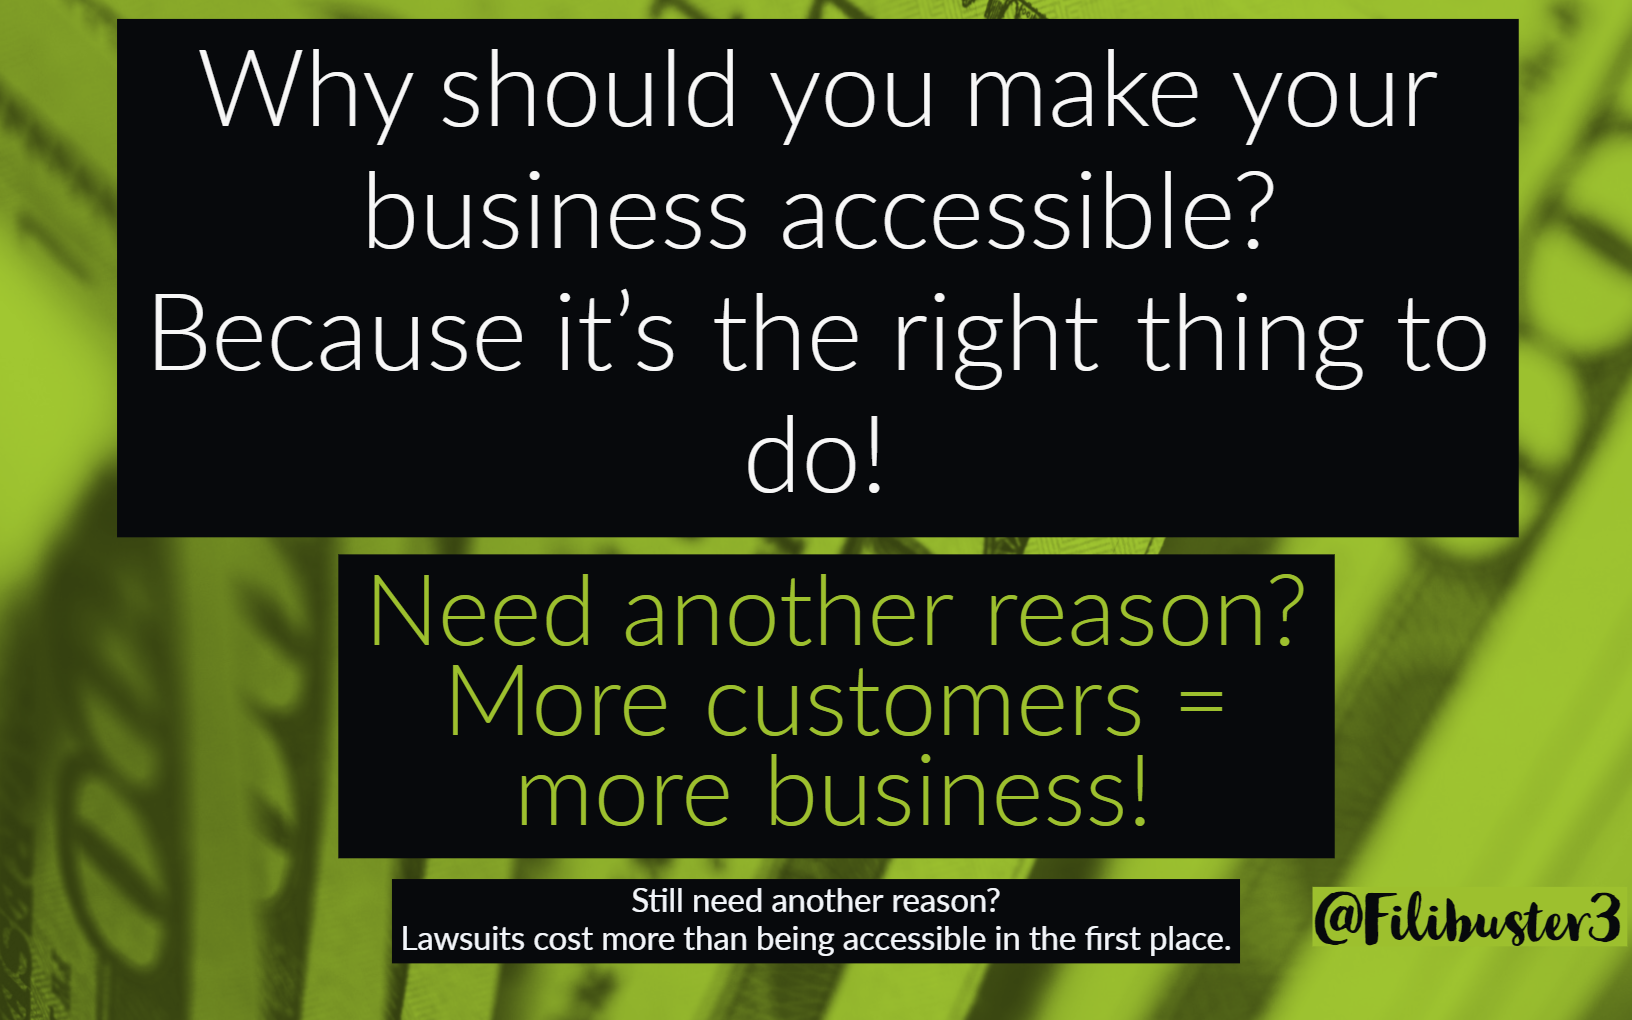 Why should you make your business accessible? Because it's the right thing to do! Need another reason? More customers = more business! Still need another reason? Lawsuits cost more than being accessible in the first place. on a background with 100 dollar bills - quote by @filibuster3